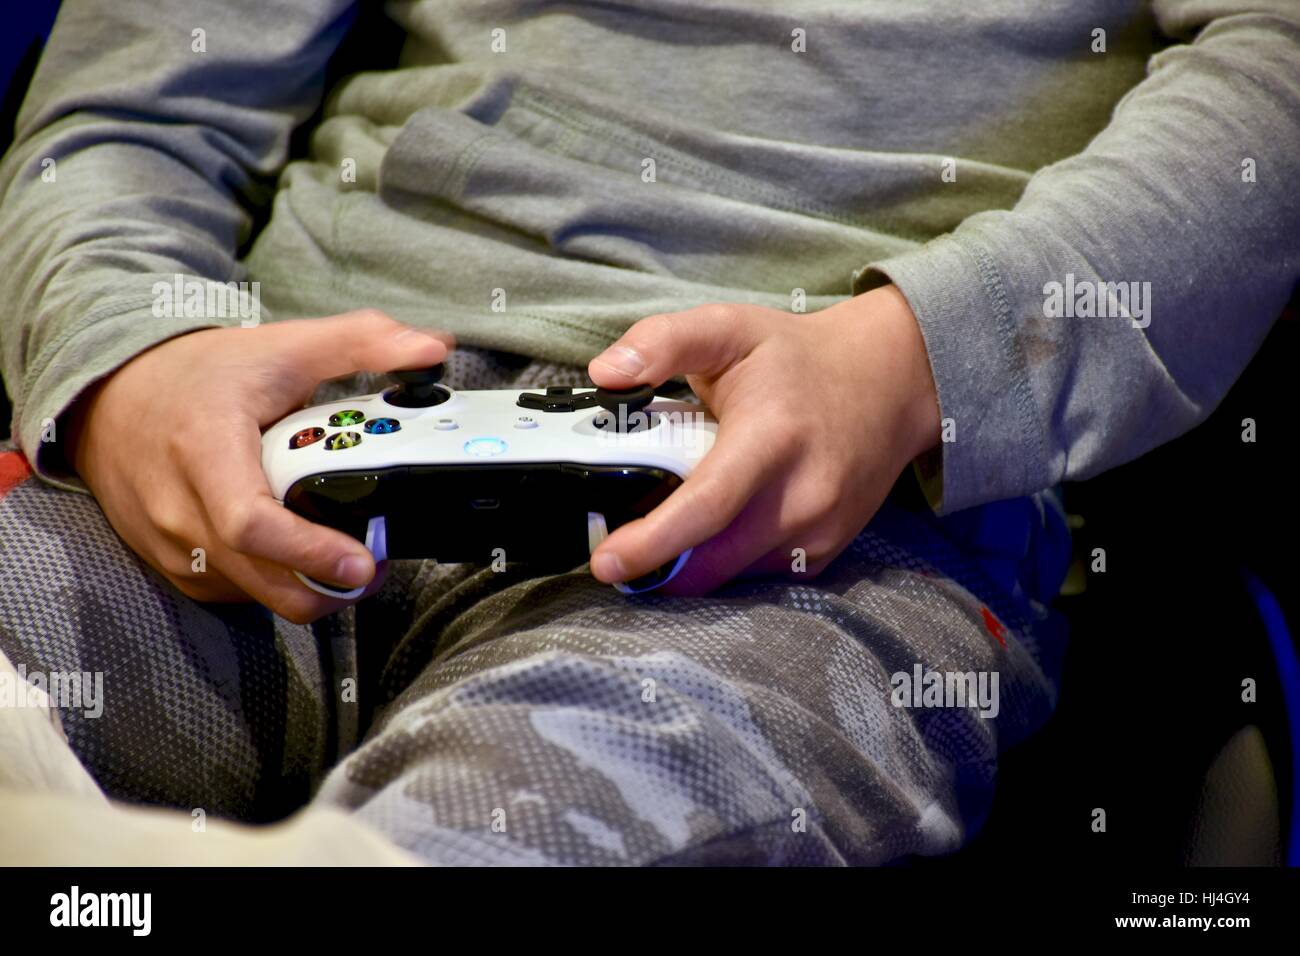 A young teen holding an Xbox One controller while playing Xbox games Stock  Photo - Alamy